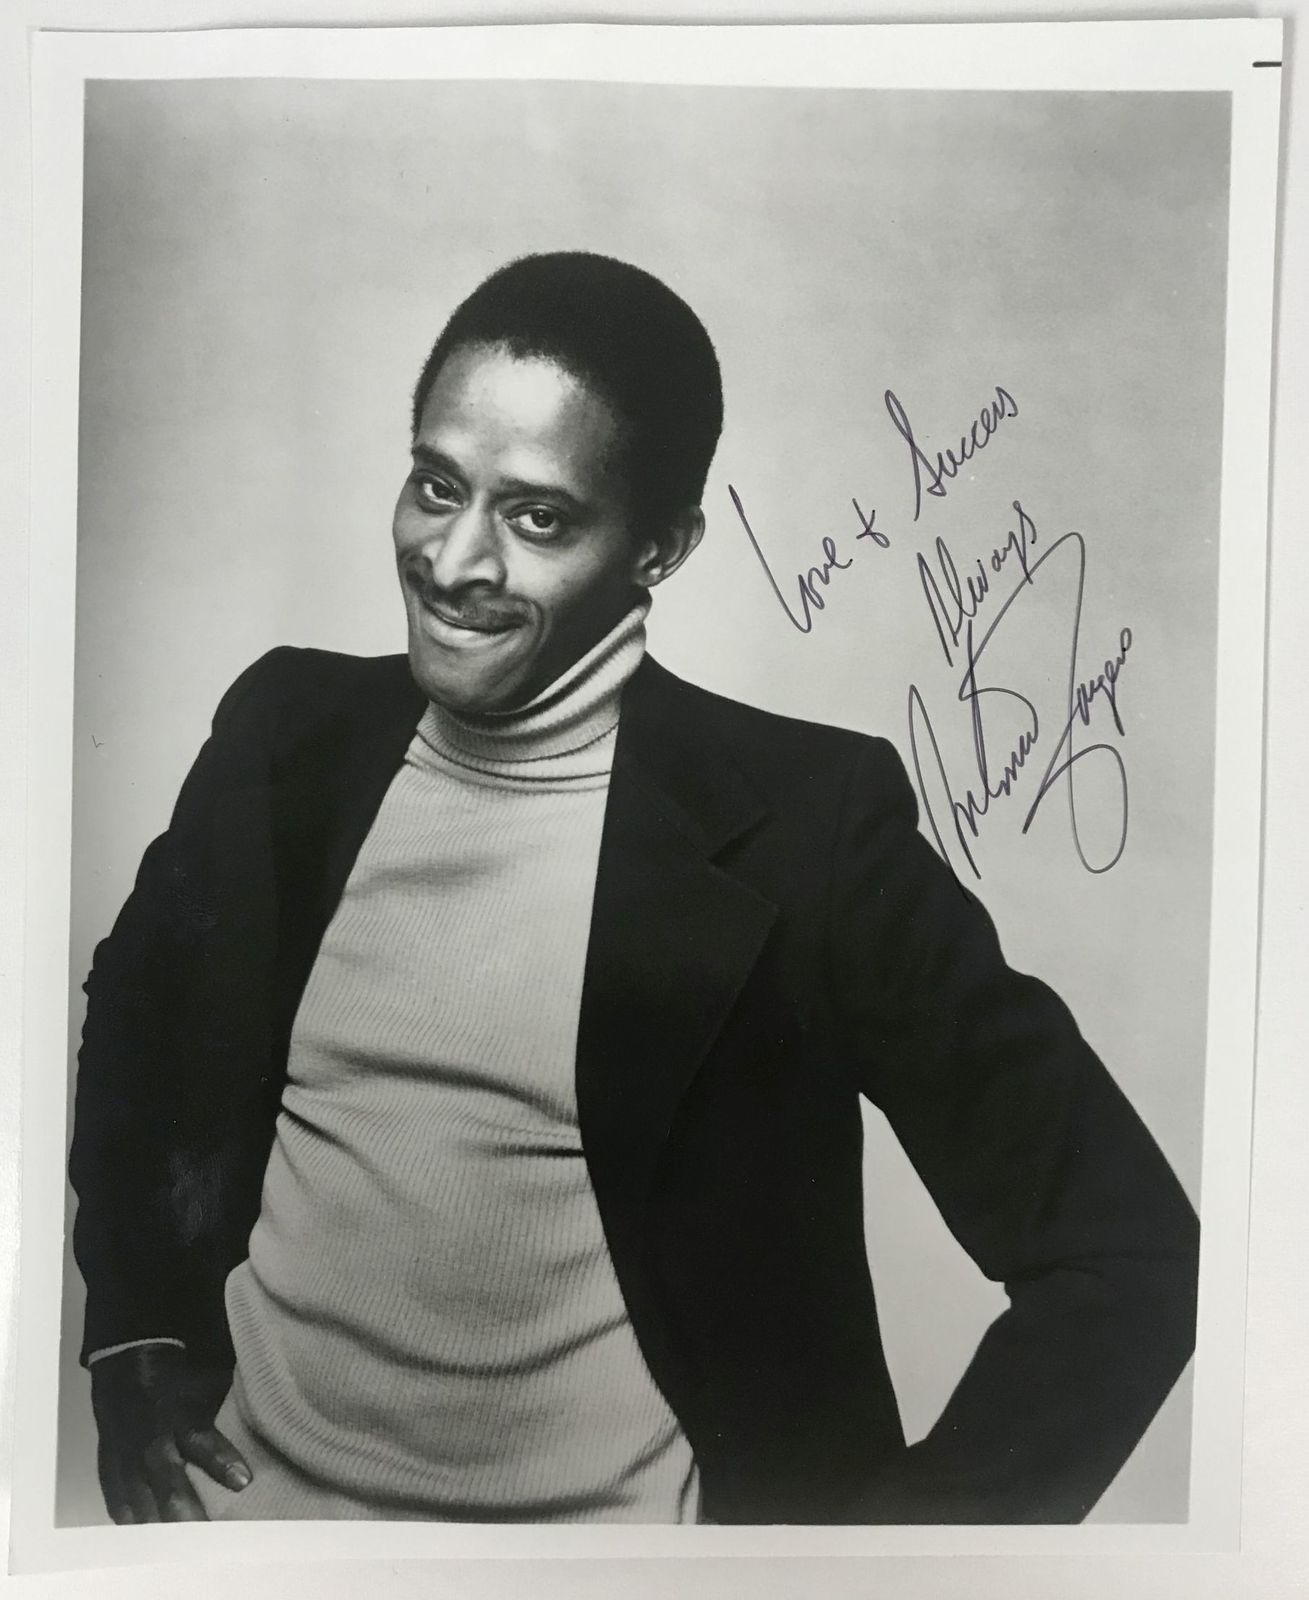 Primary image for Antonio Fargas Signed Autographed Glossy 8x10 Photo - HOLO COA